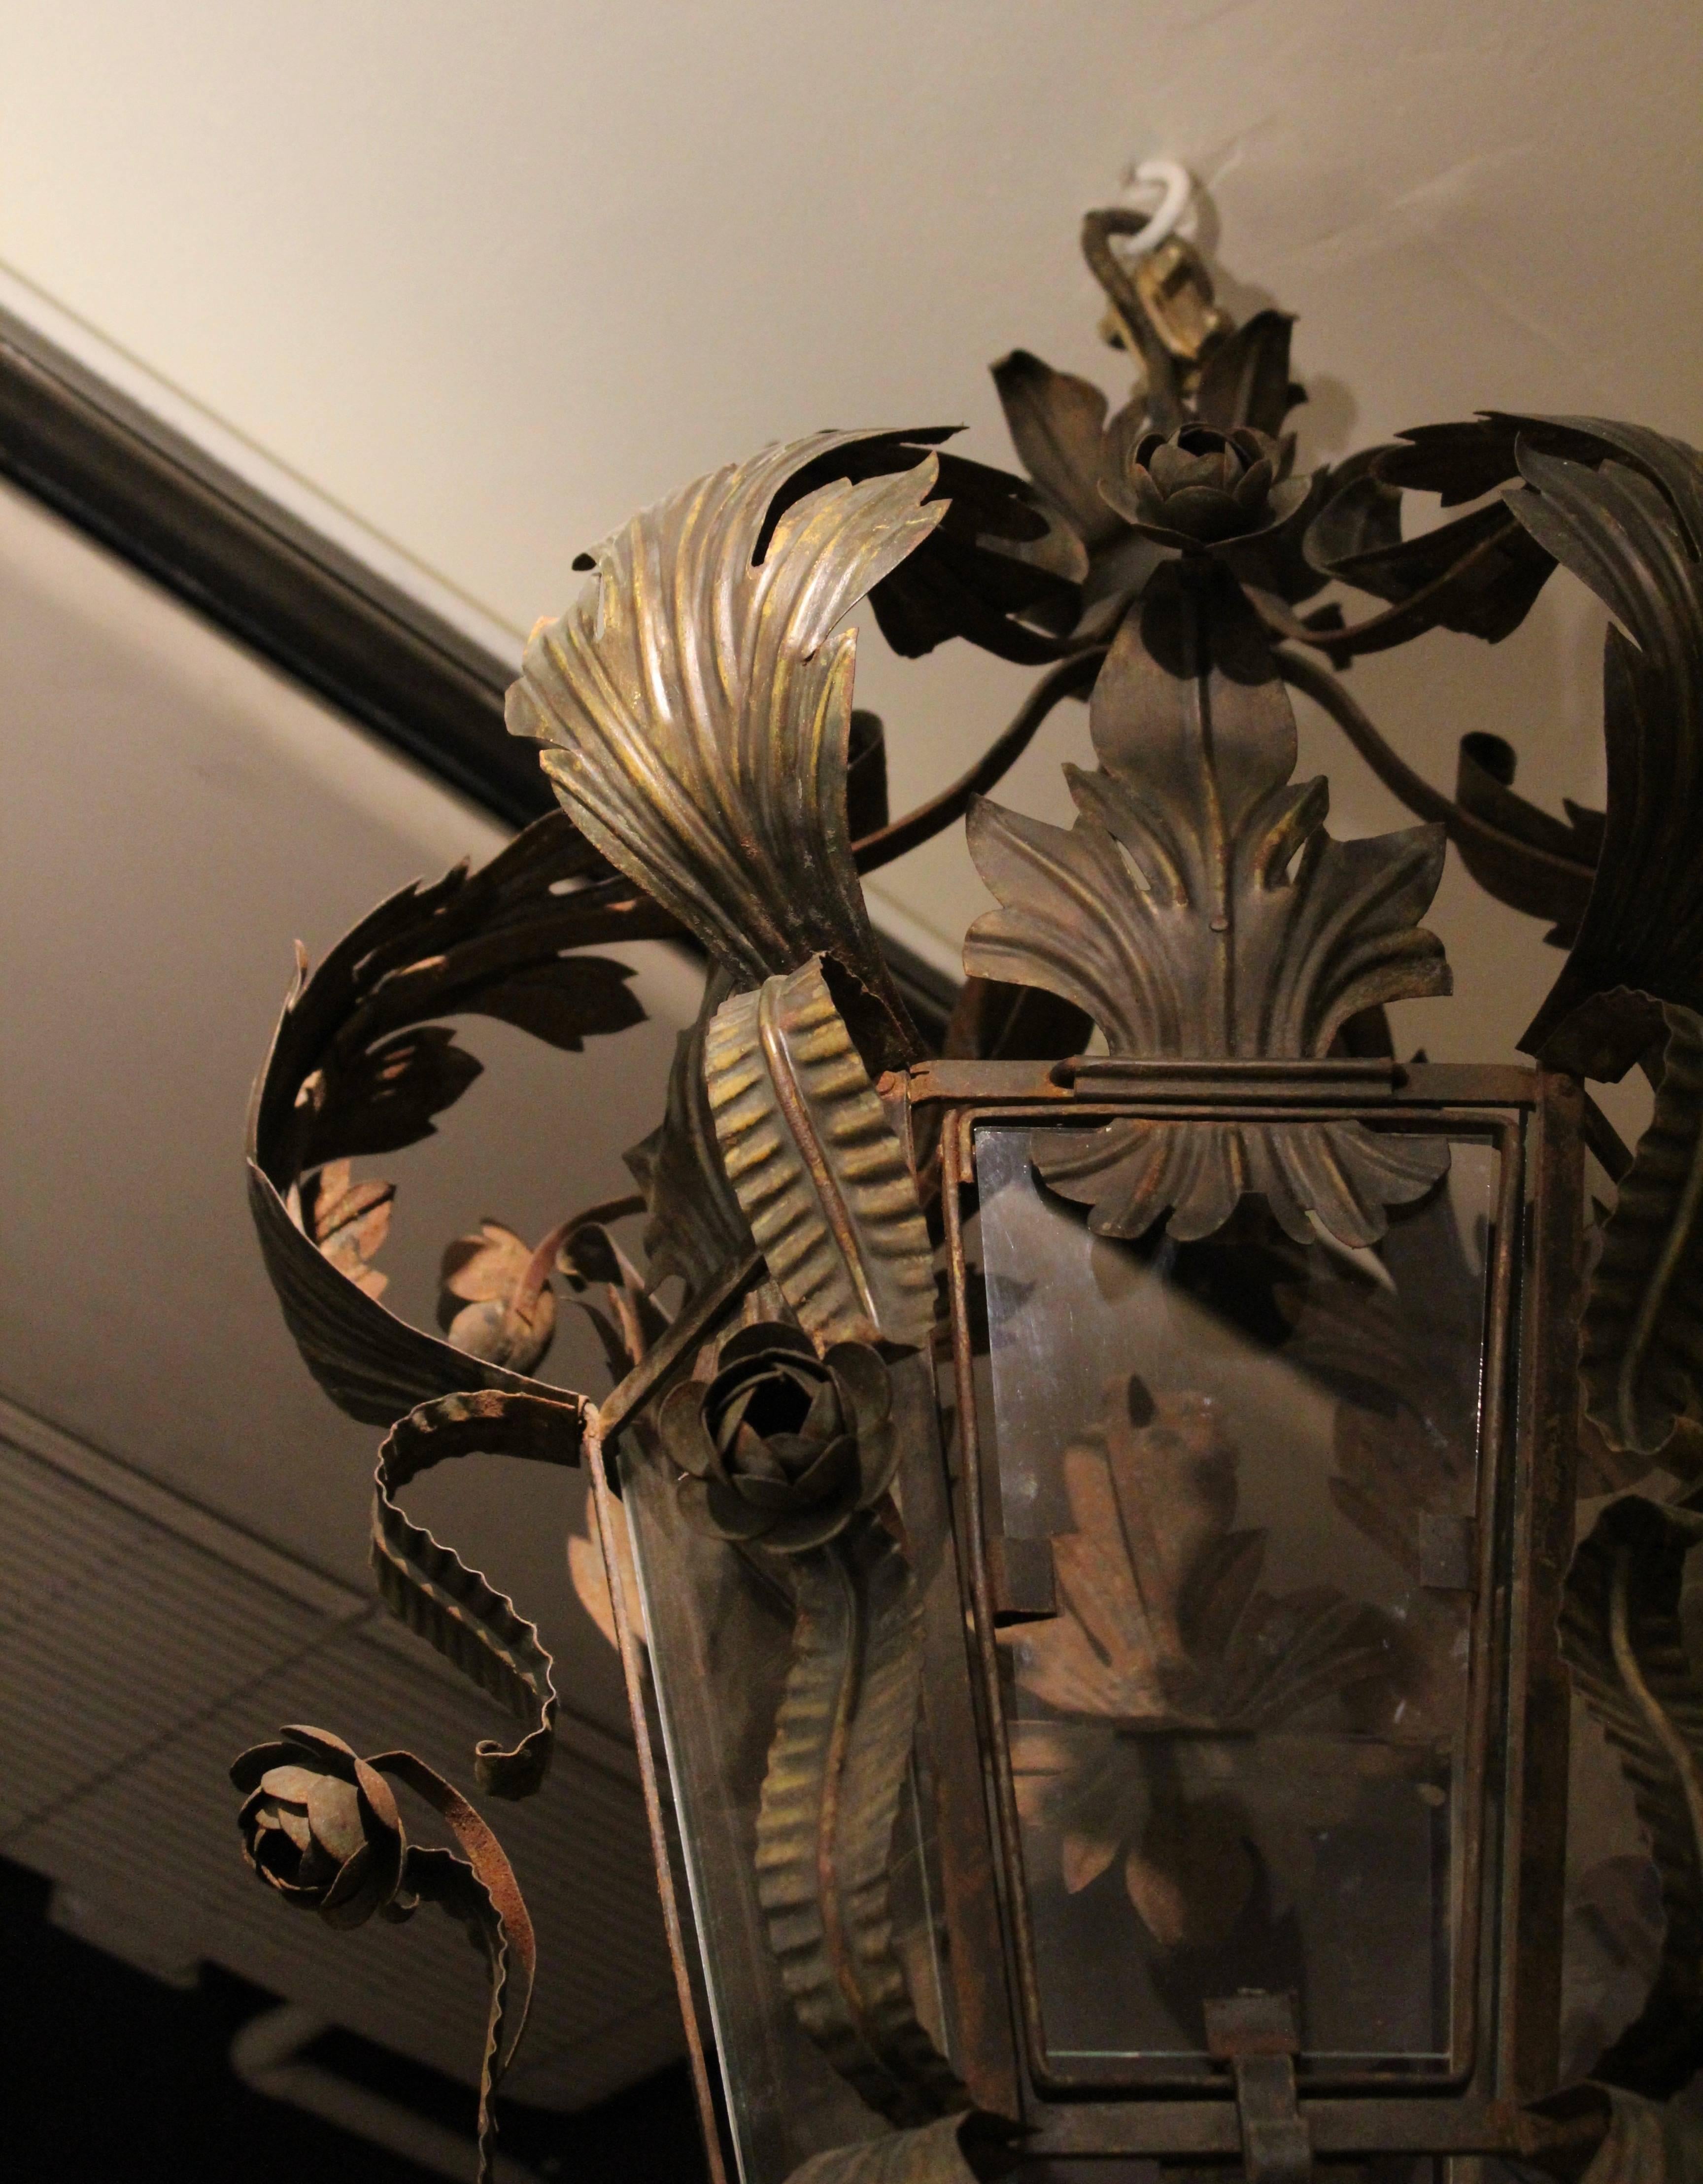 French Provincial wrought iron lantern in a foliate design, circa 1930. The top of the lantern formed by large curving acanthus leaves interspersed with roses, above the hexagonal glass body, each edge with a scrolling leaf centred by a rose. The